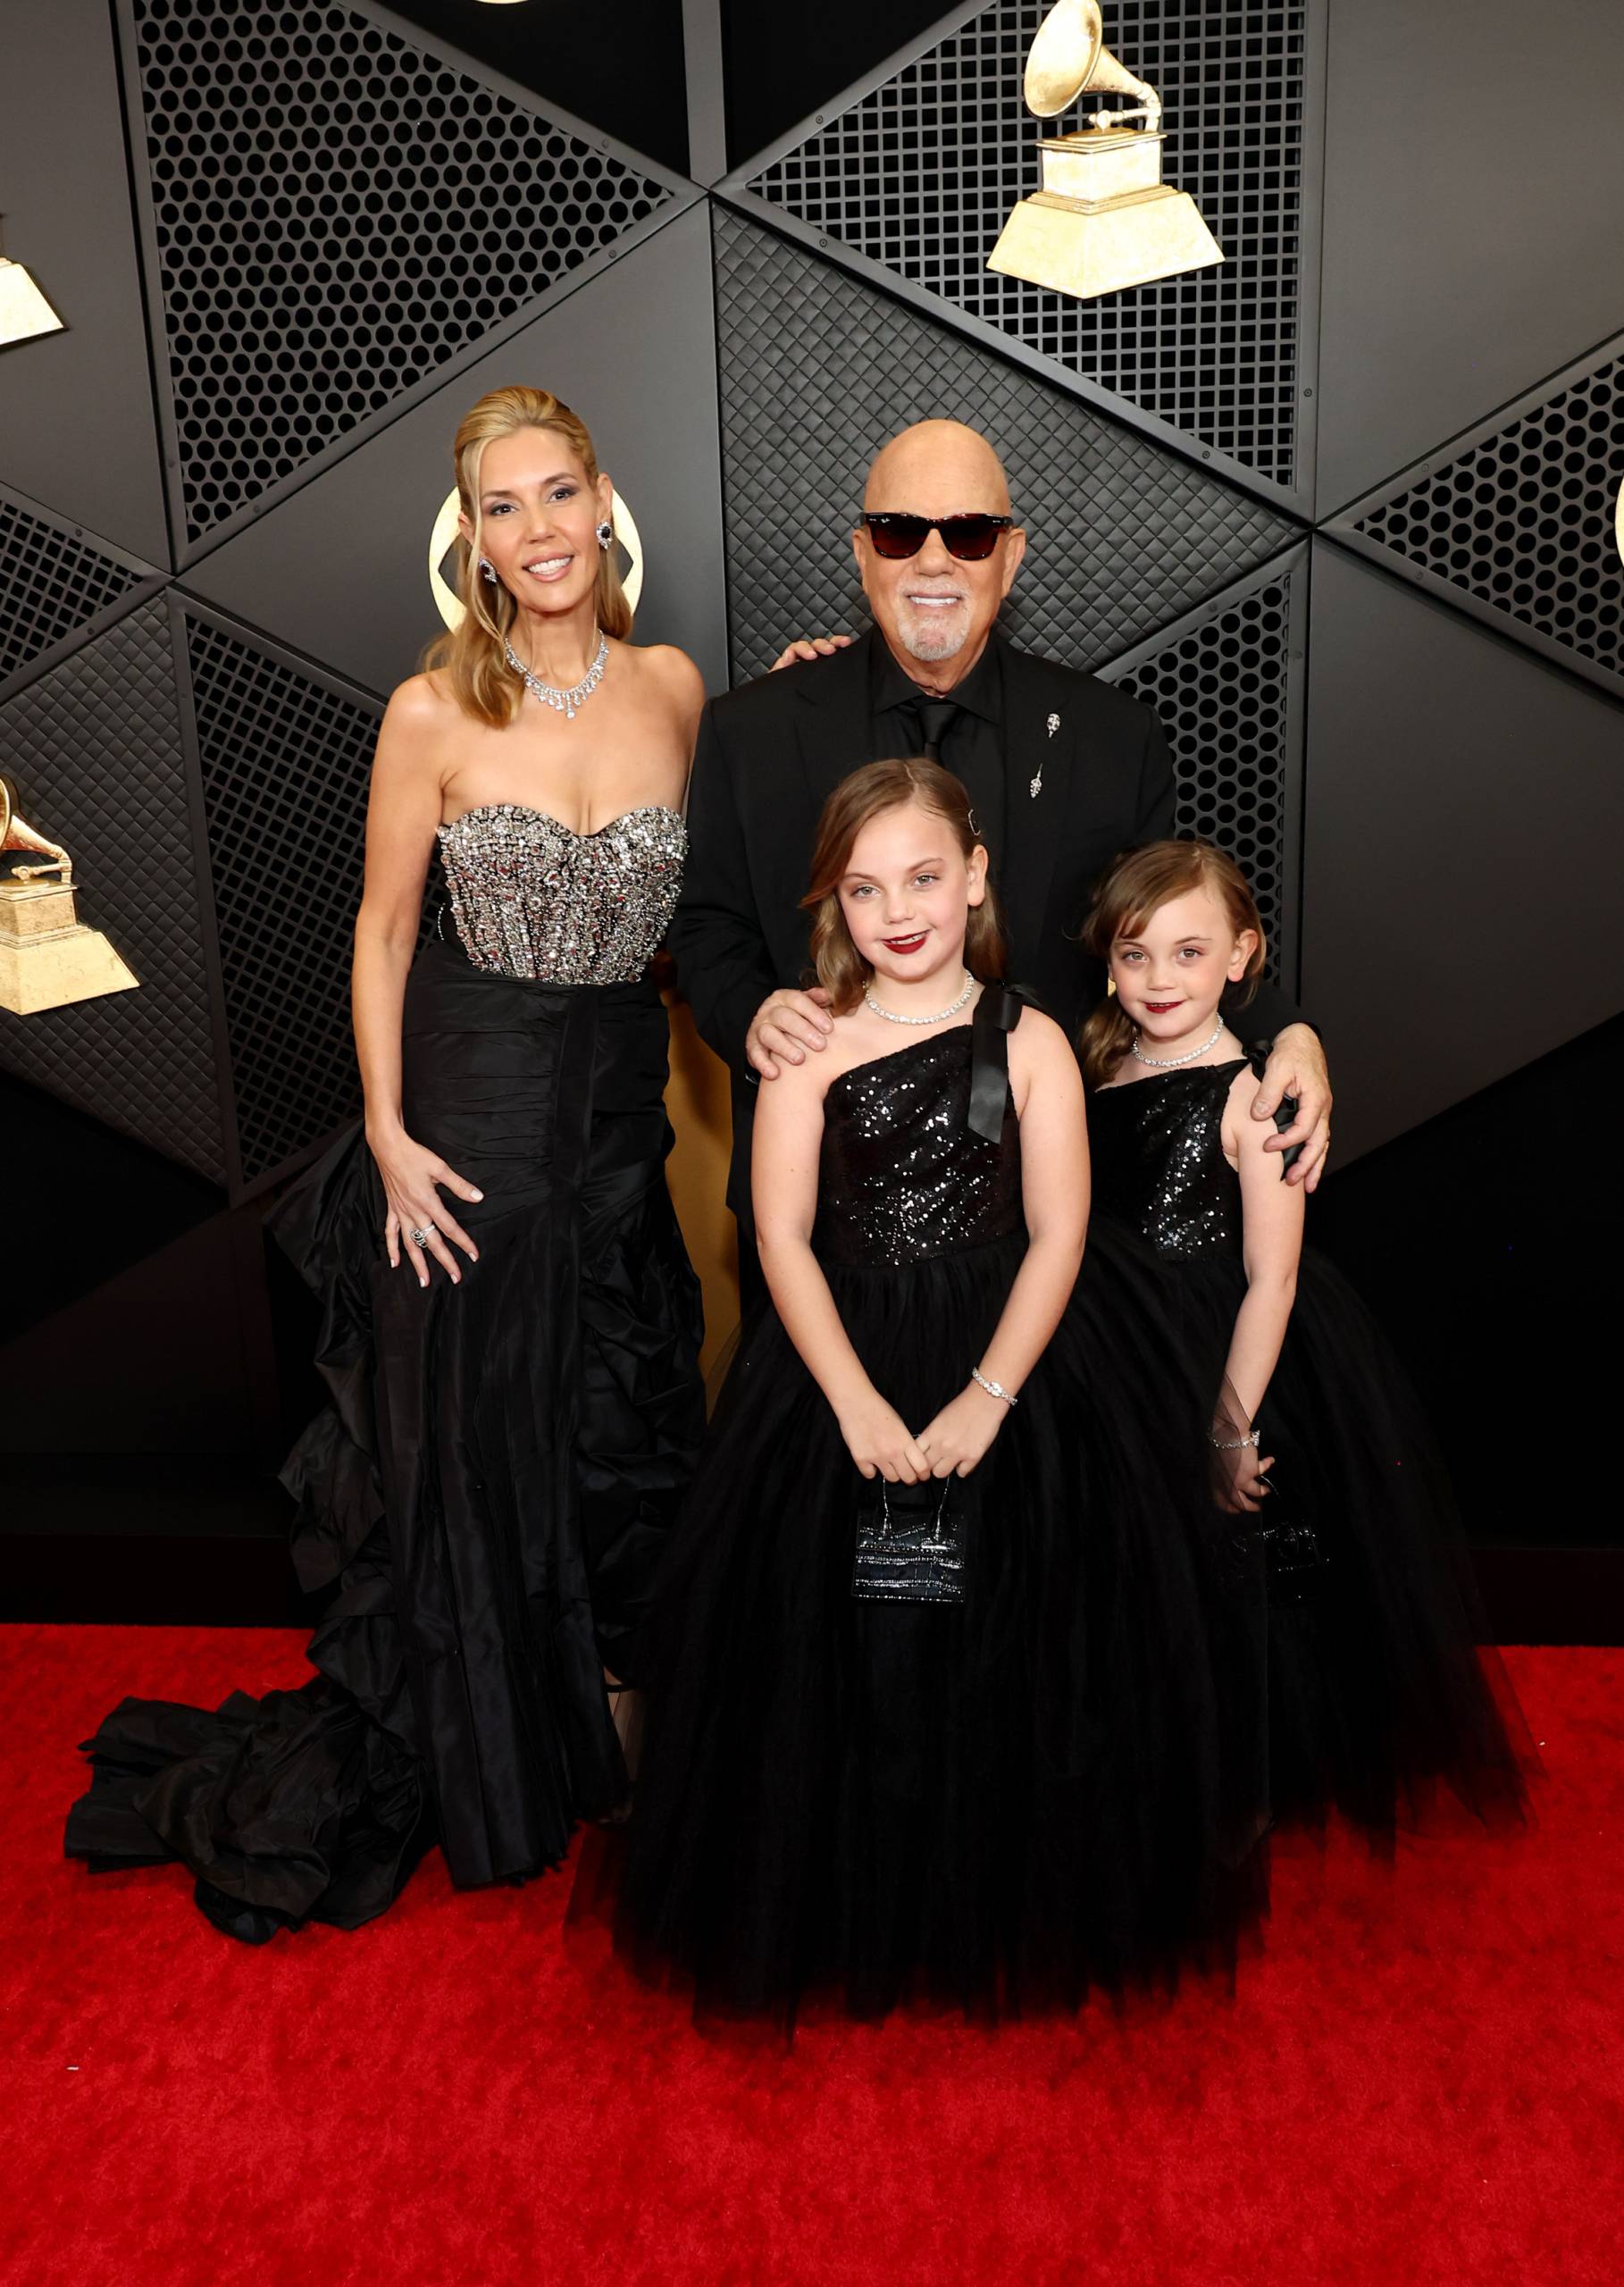 A slender blond woman in a black and silver dress and a bald man in black suit and sunglasses stand on the red carpet with two young girls in black dresses.